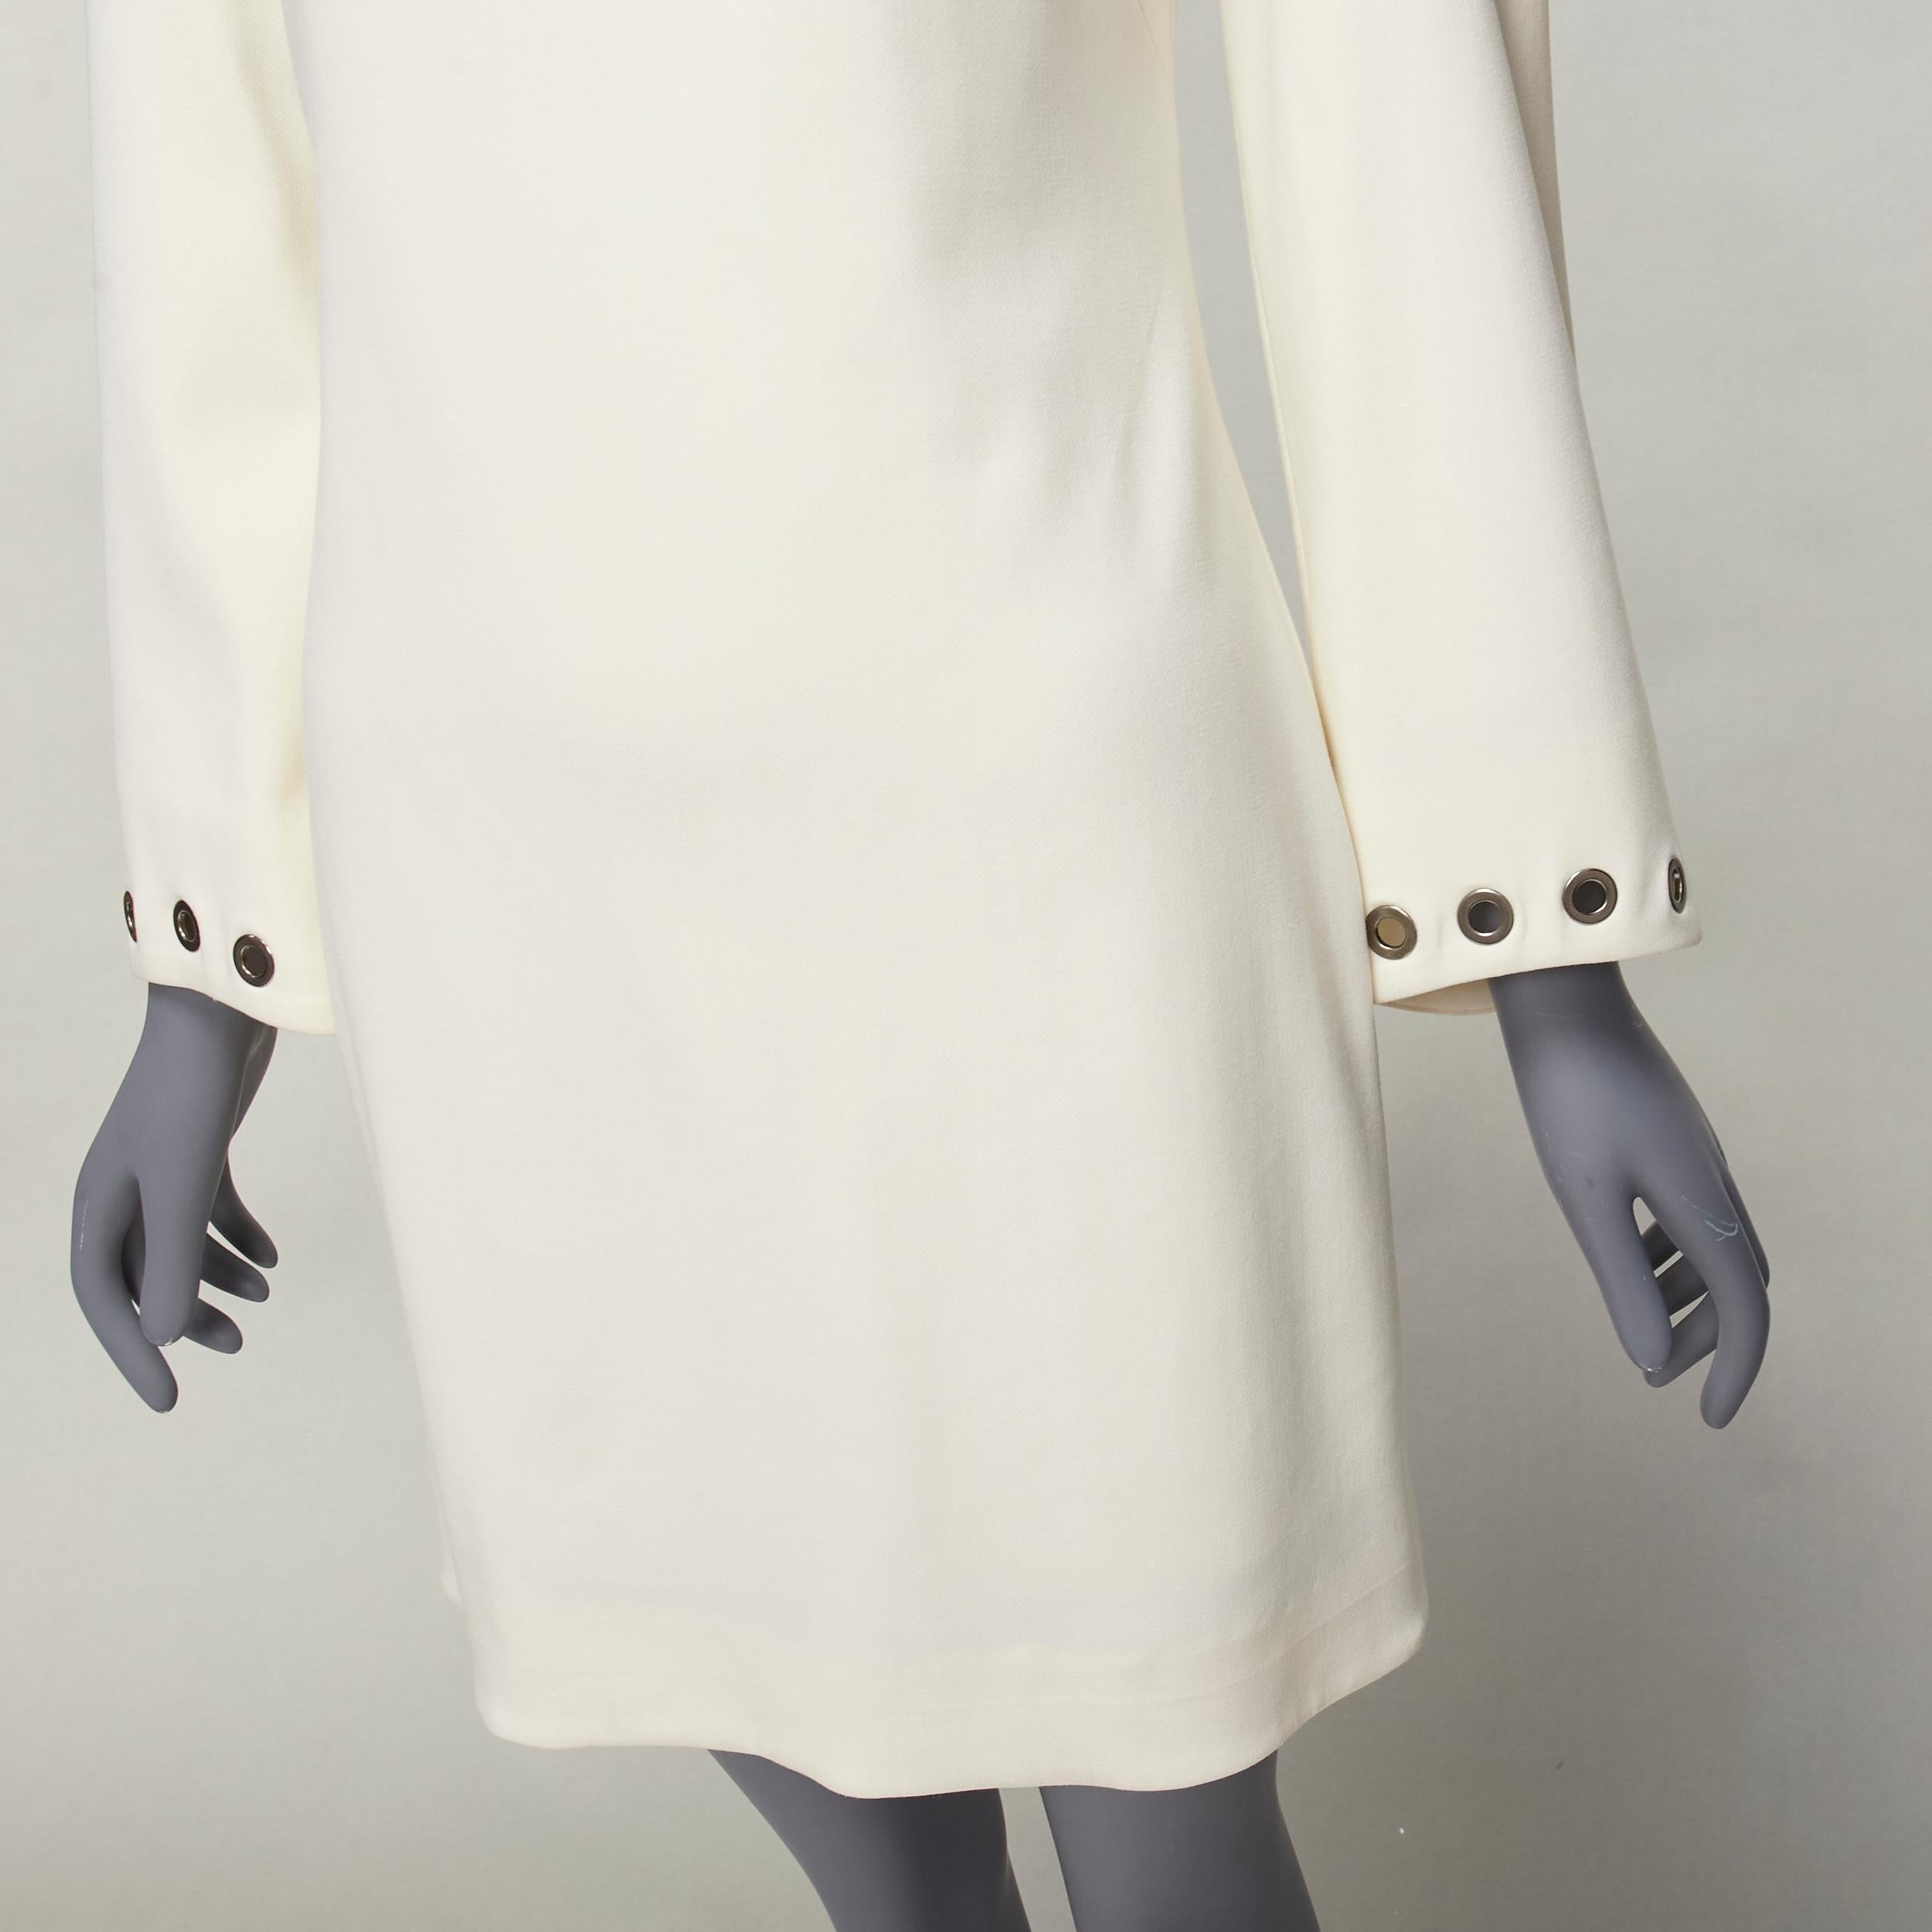 CELINE Vintage grommet detail cream crepe bell sleeve mini shift dress
Reference: CC/A00404
Brand: Celine
As seen on: Barbara Meier
Material: Feels like wool
Color: Cream, Silver
Pattern: Solid
Closure: Zip
Lining: Cream Fabric
Extra Details: Back